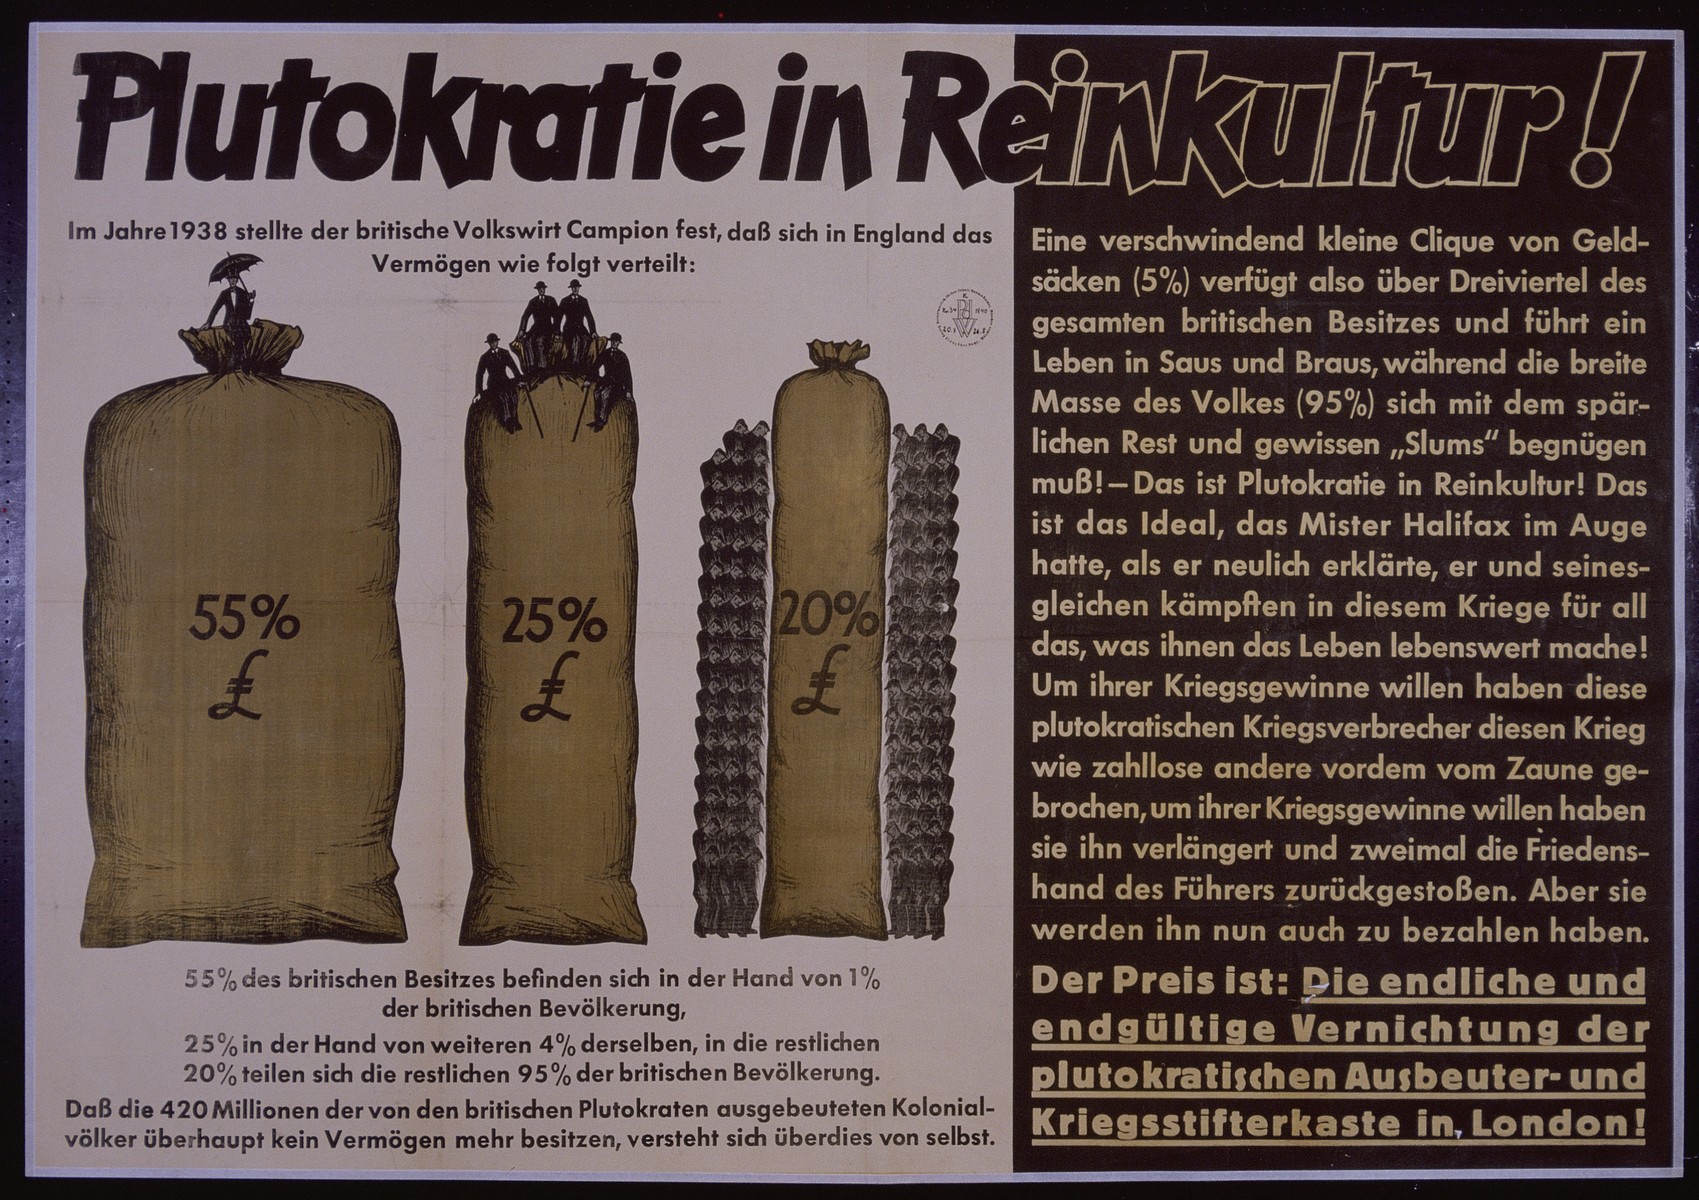 Nazi propaganda poster entitled, "Plutokratie in Reinkultur,"  issued by the "Parole der Woche," a wall newspaper (Wandzeitung) published by the National Socialist Party propaganda office in Munich.